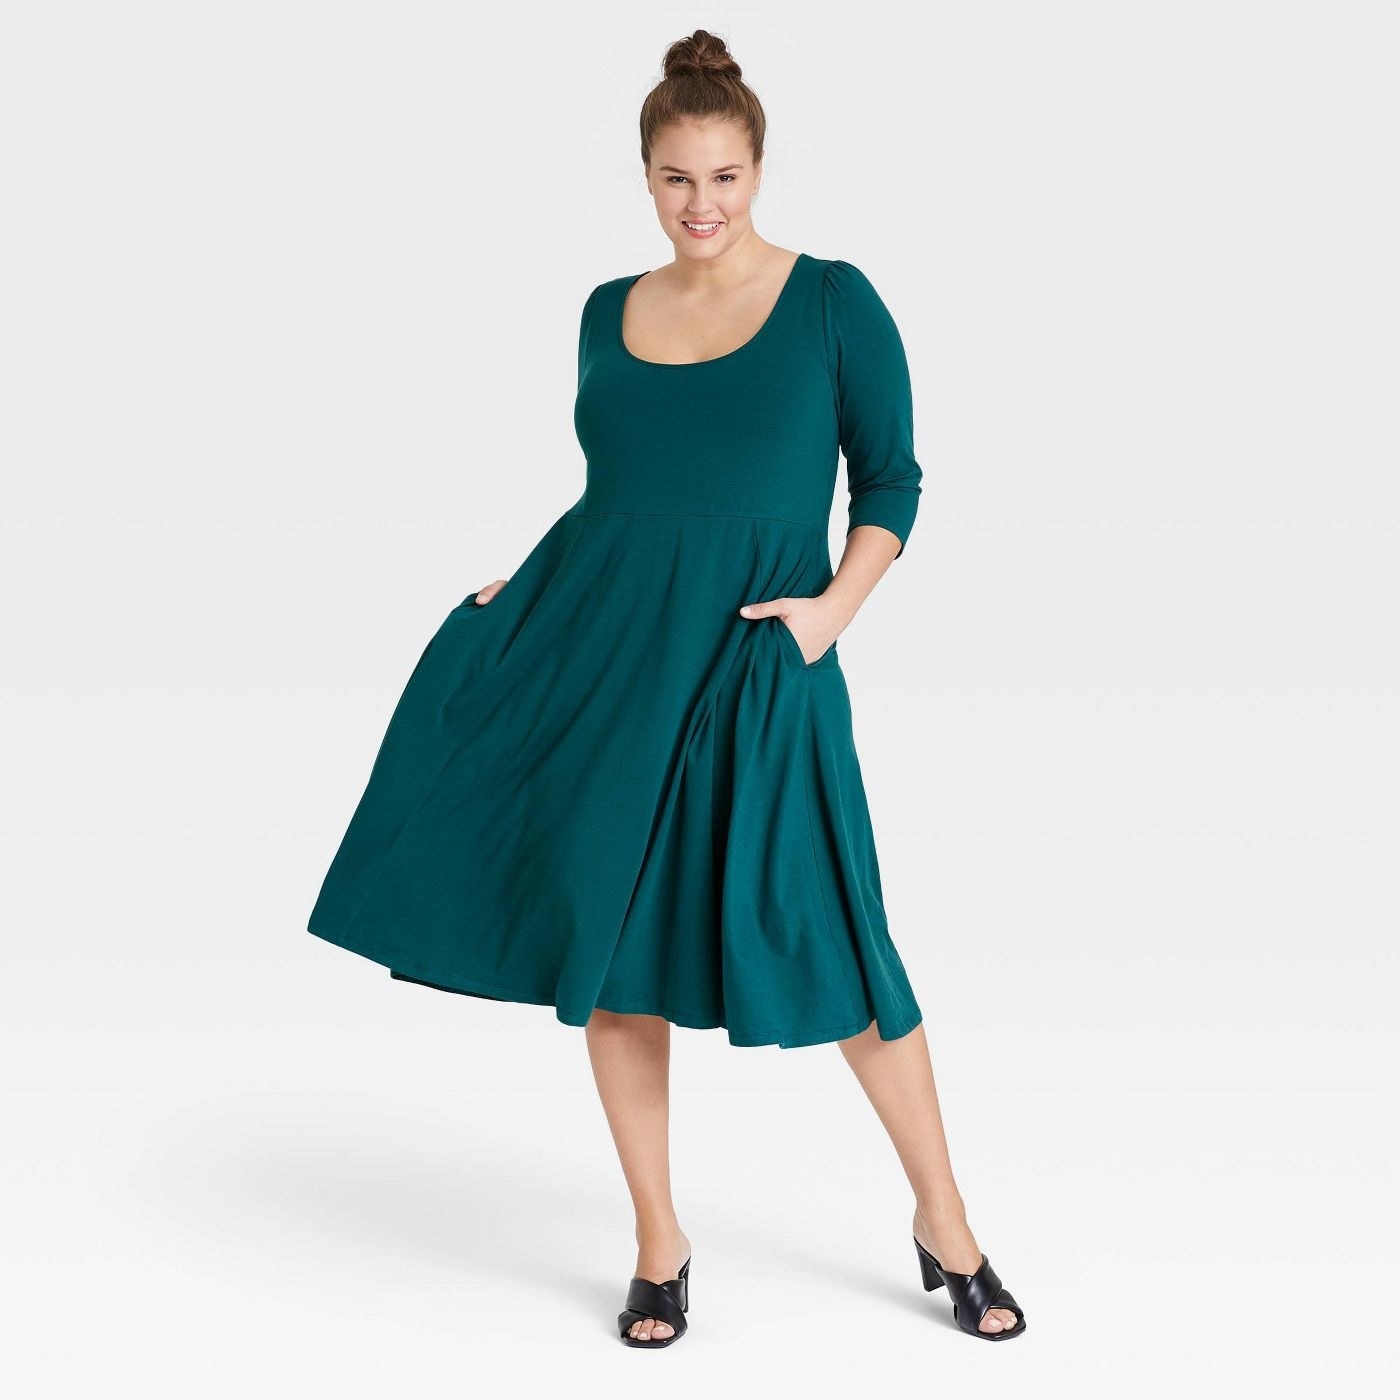 model in a teal round-neck midi dress with a flowy skirt and pockets